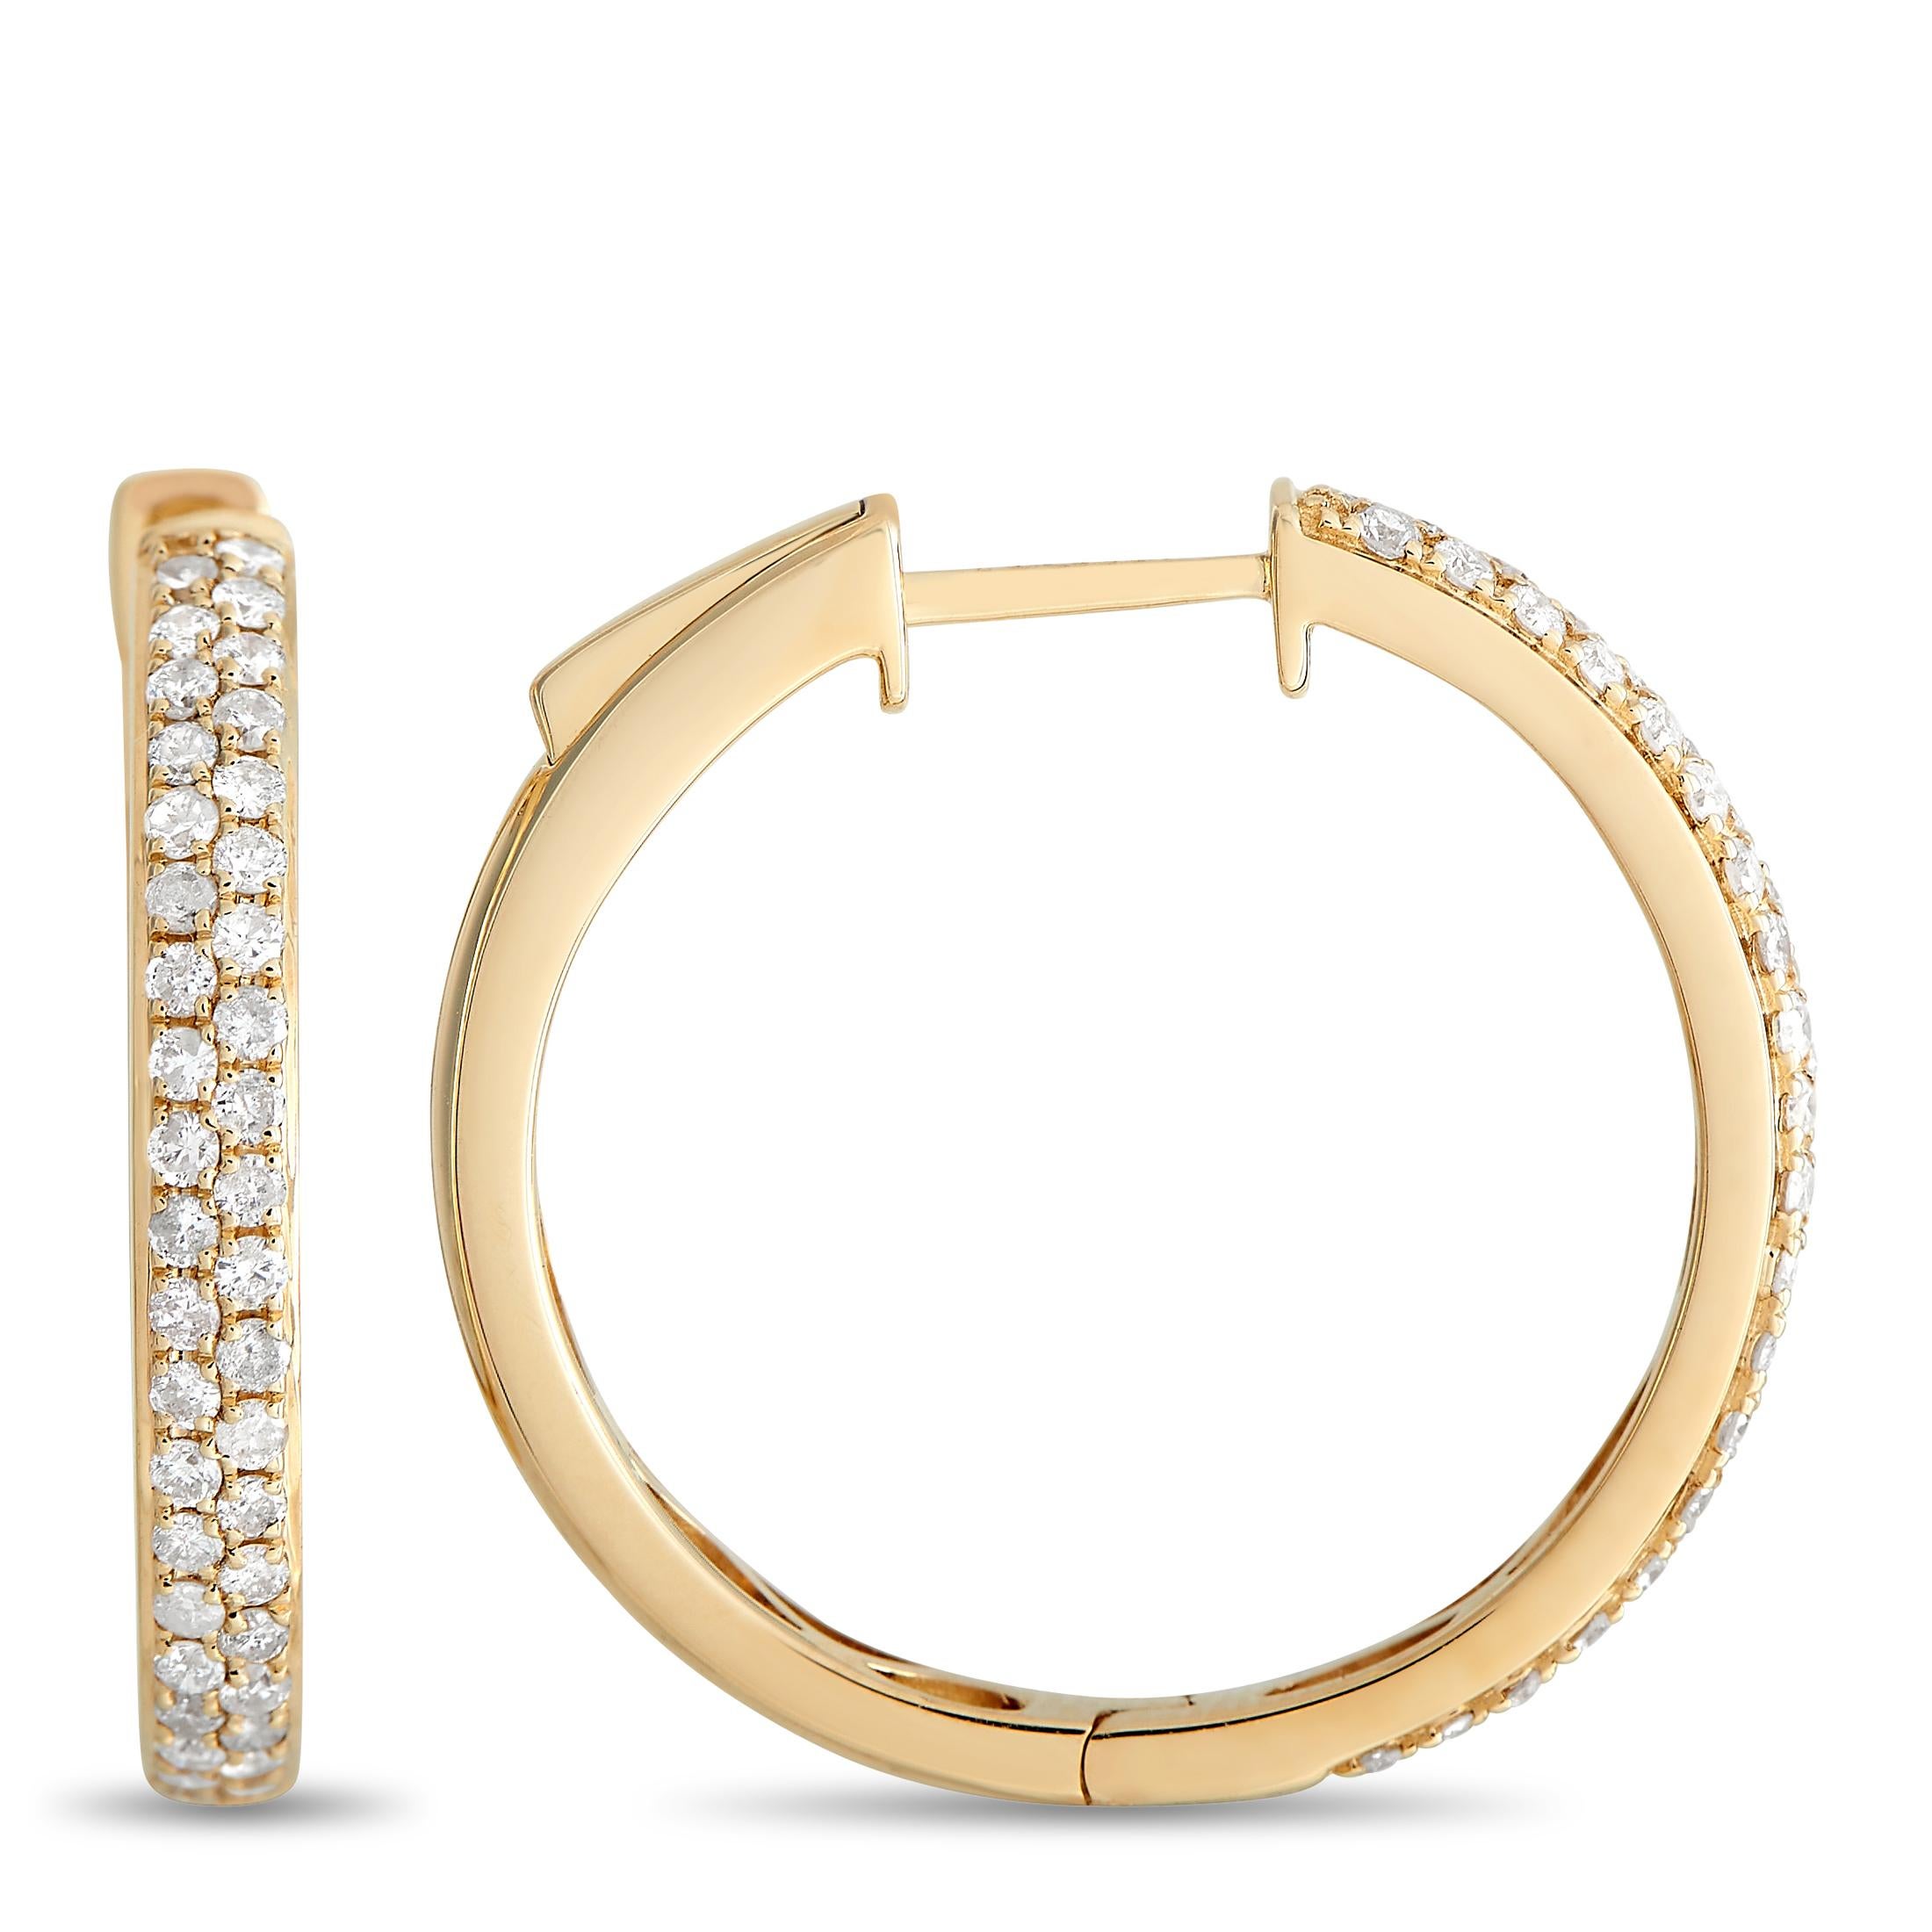 A lustrous 14K Yellow Gold setting measuring 0.75” round serves as the perfect foundation for these elevated hoop earrings. Accented by sparkling diamonds totaling 0.65 carats, they’ll instantly add a touch of luxury to any ensemble. 

This jewelry